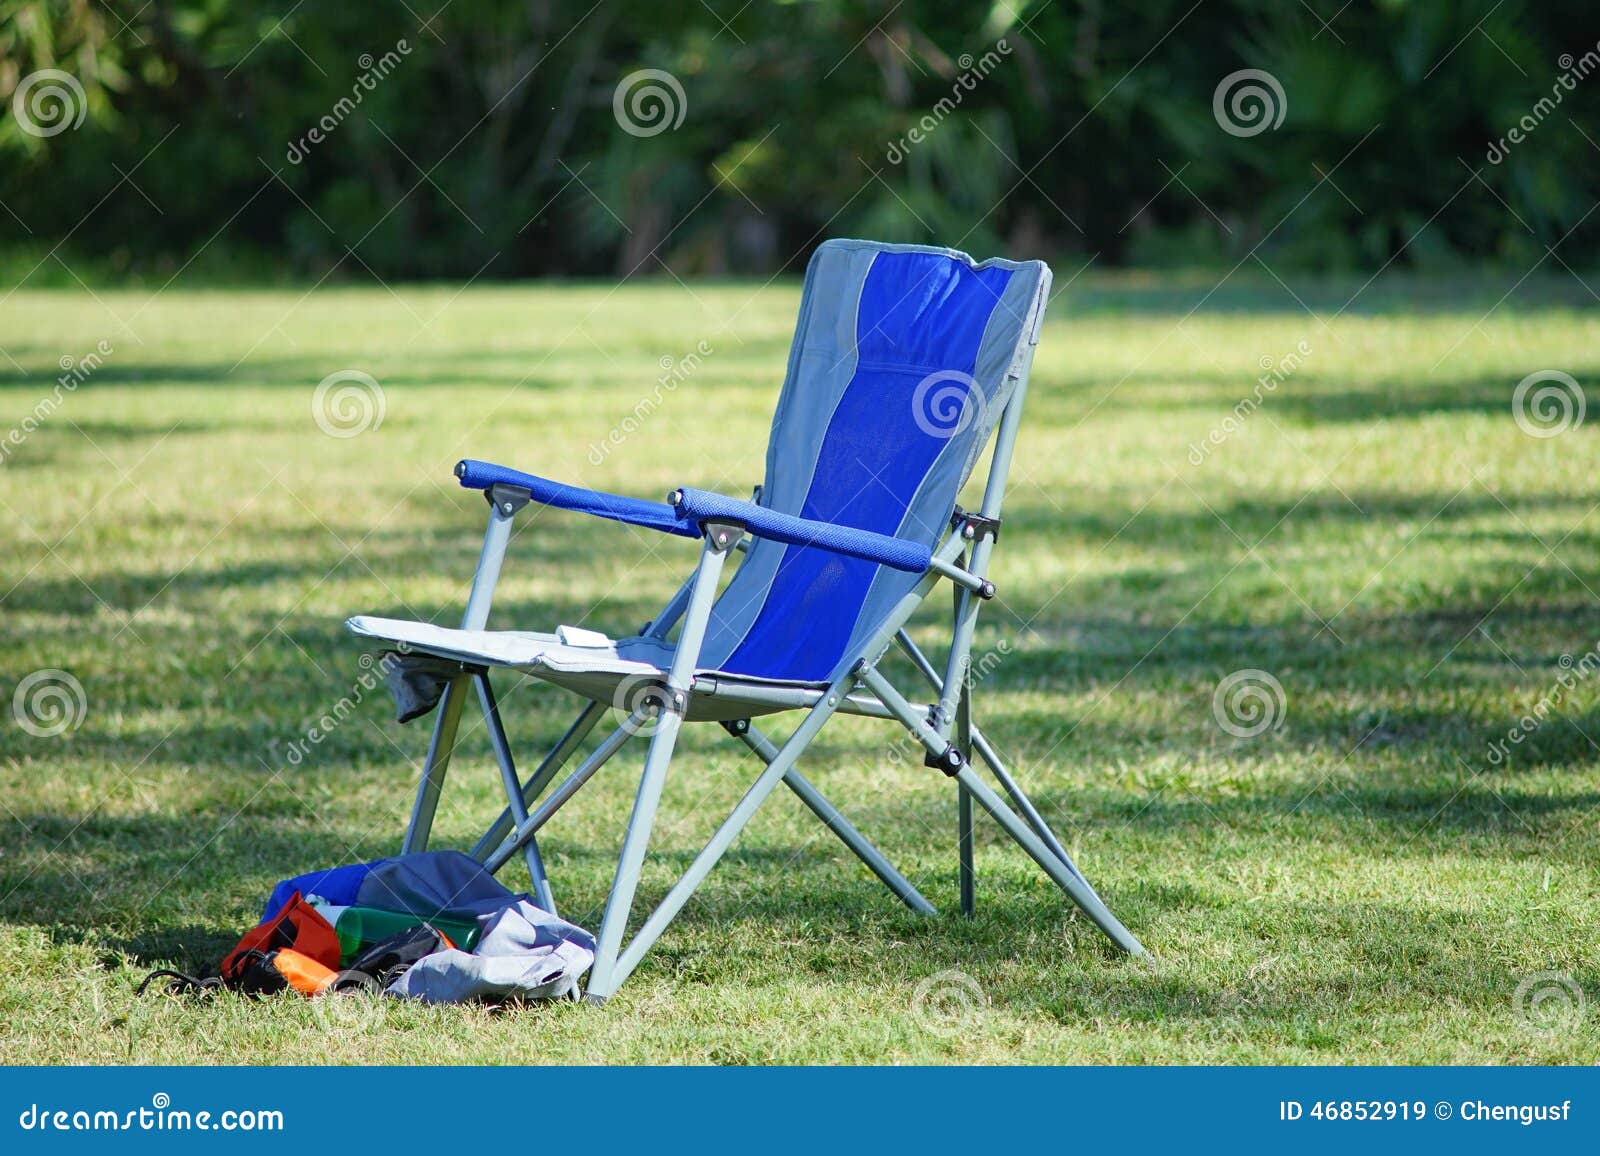 A Folding Chair On Soccer Field Stock Image Image Of Seat Camp